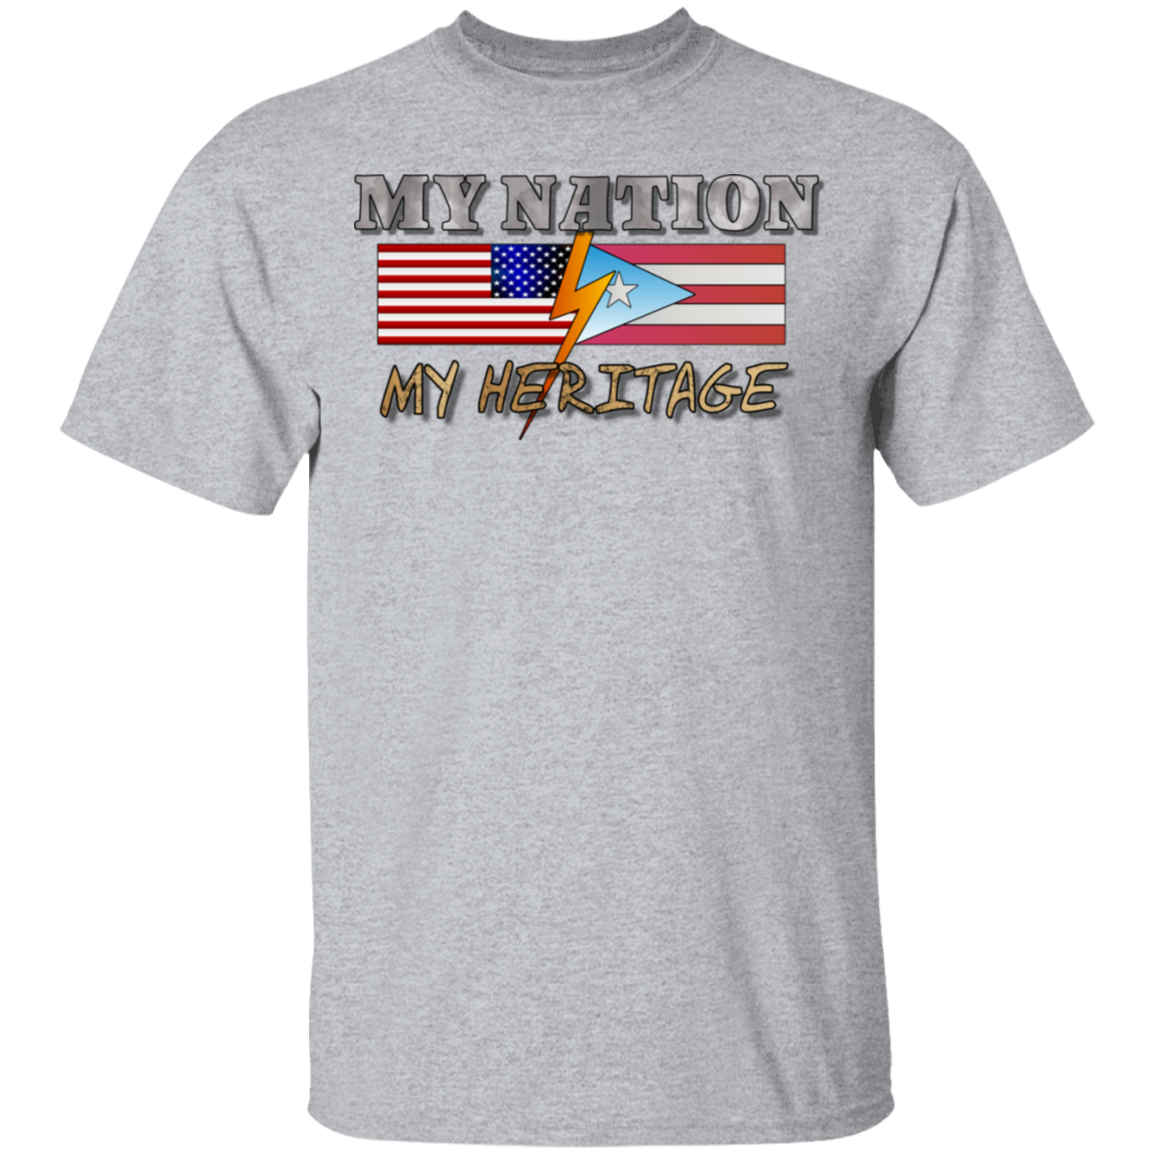 MY Nation MY Heritage 5.3 oz. T-Shirt - Puerto Rican Pride